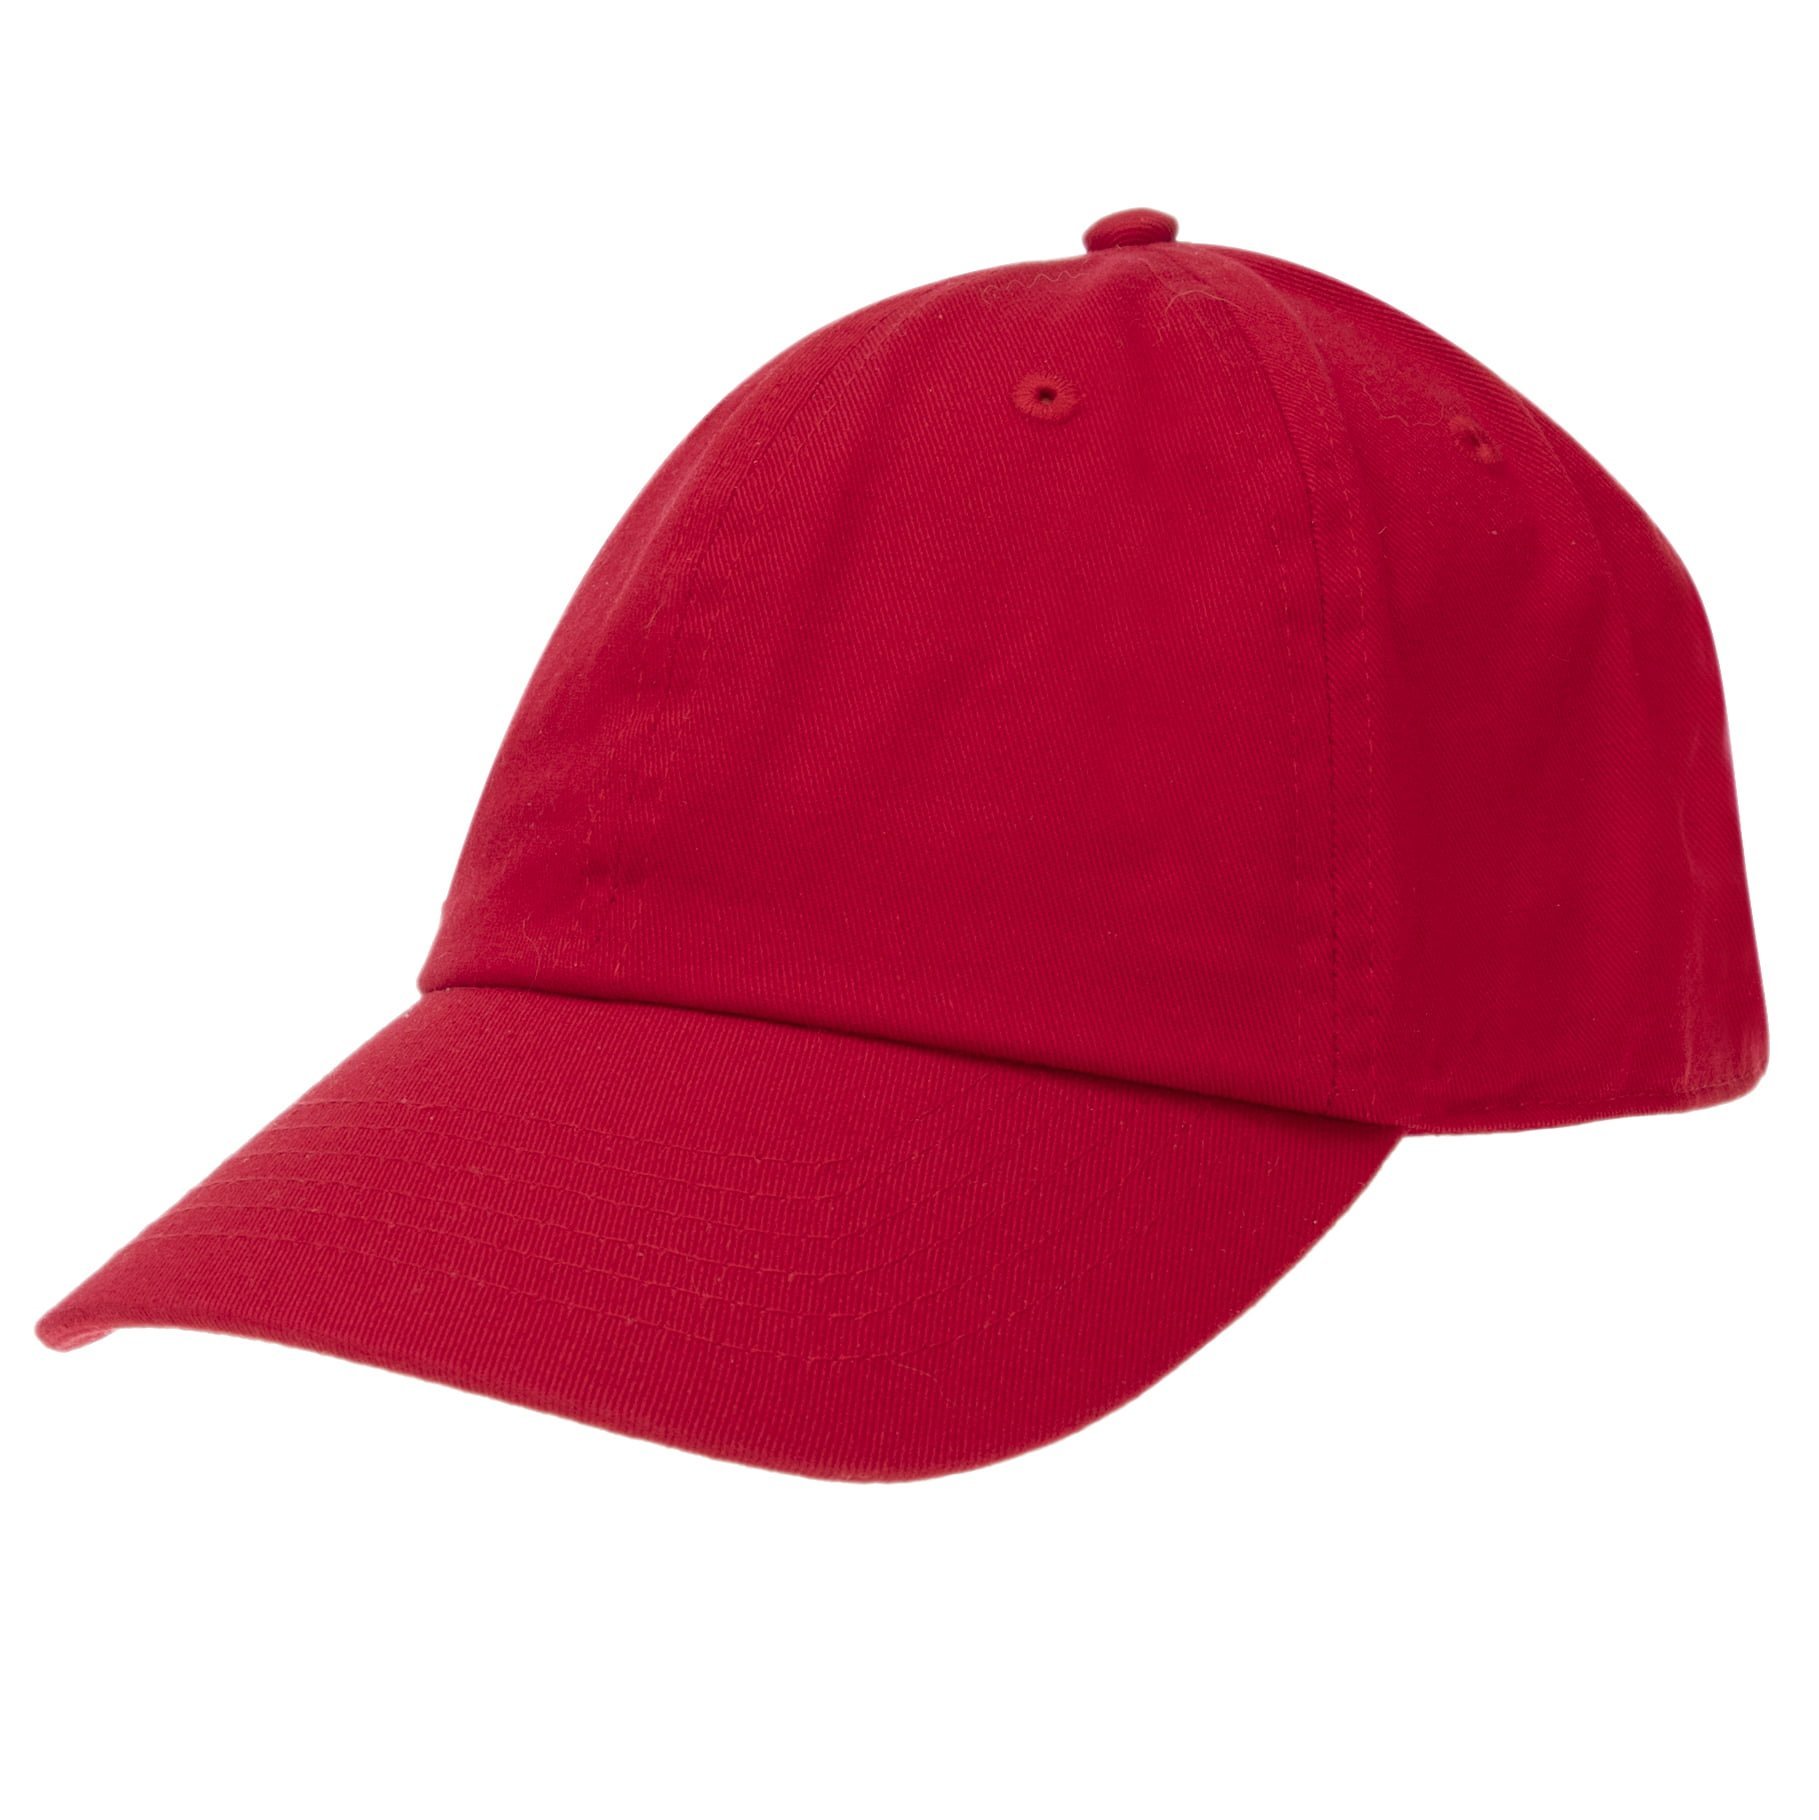 1pc Red Baseball Cotton Cap - Dad Hat - Low Profile - Stone Washed